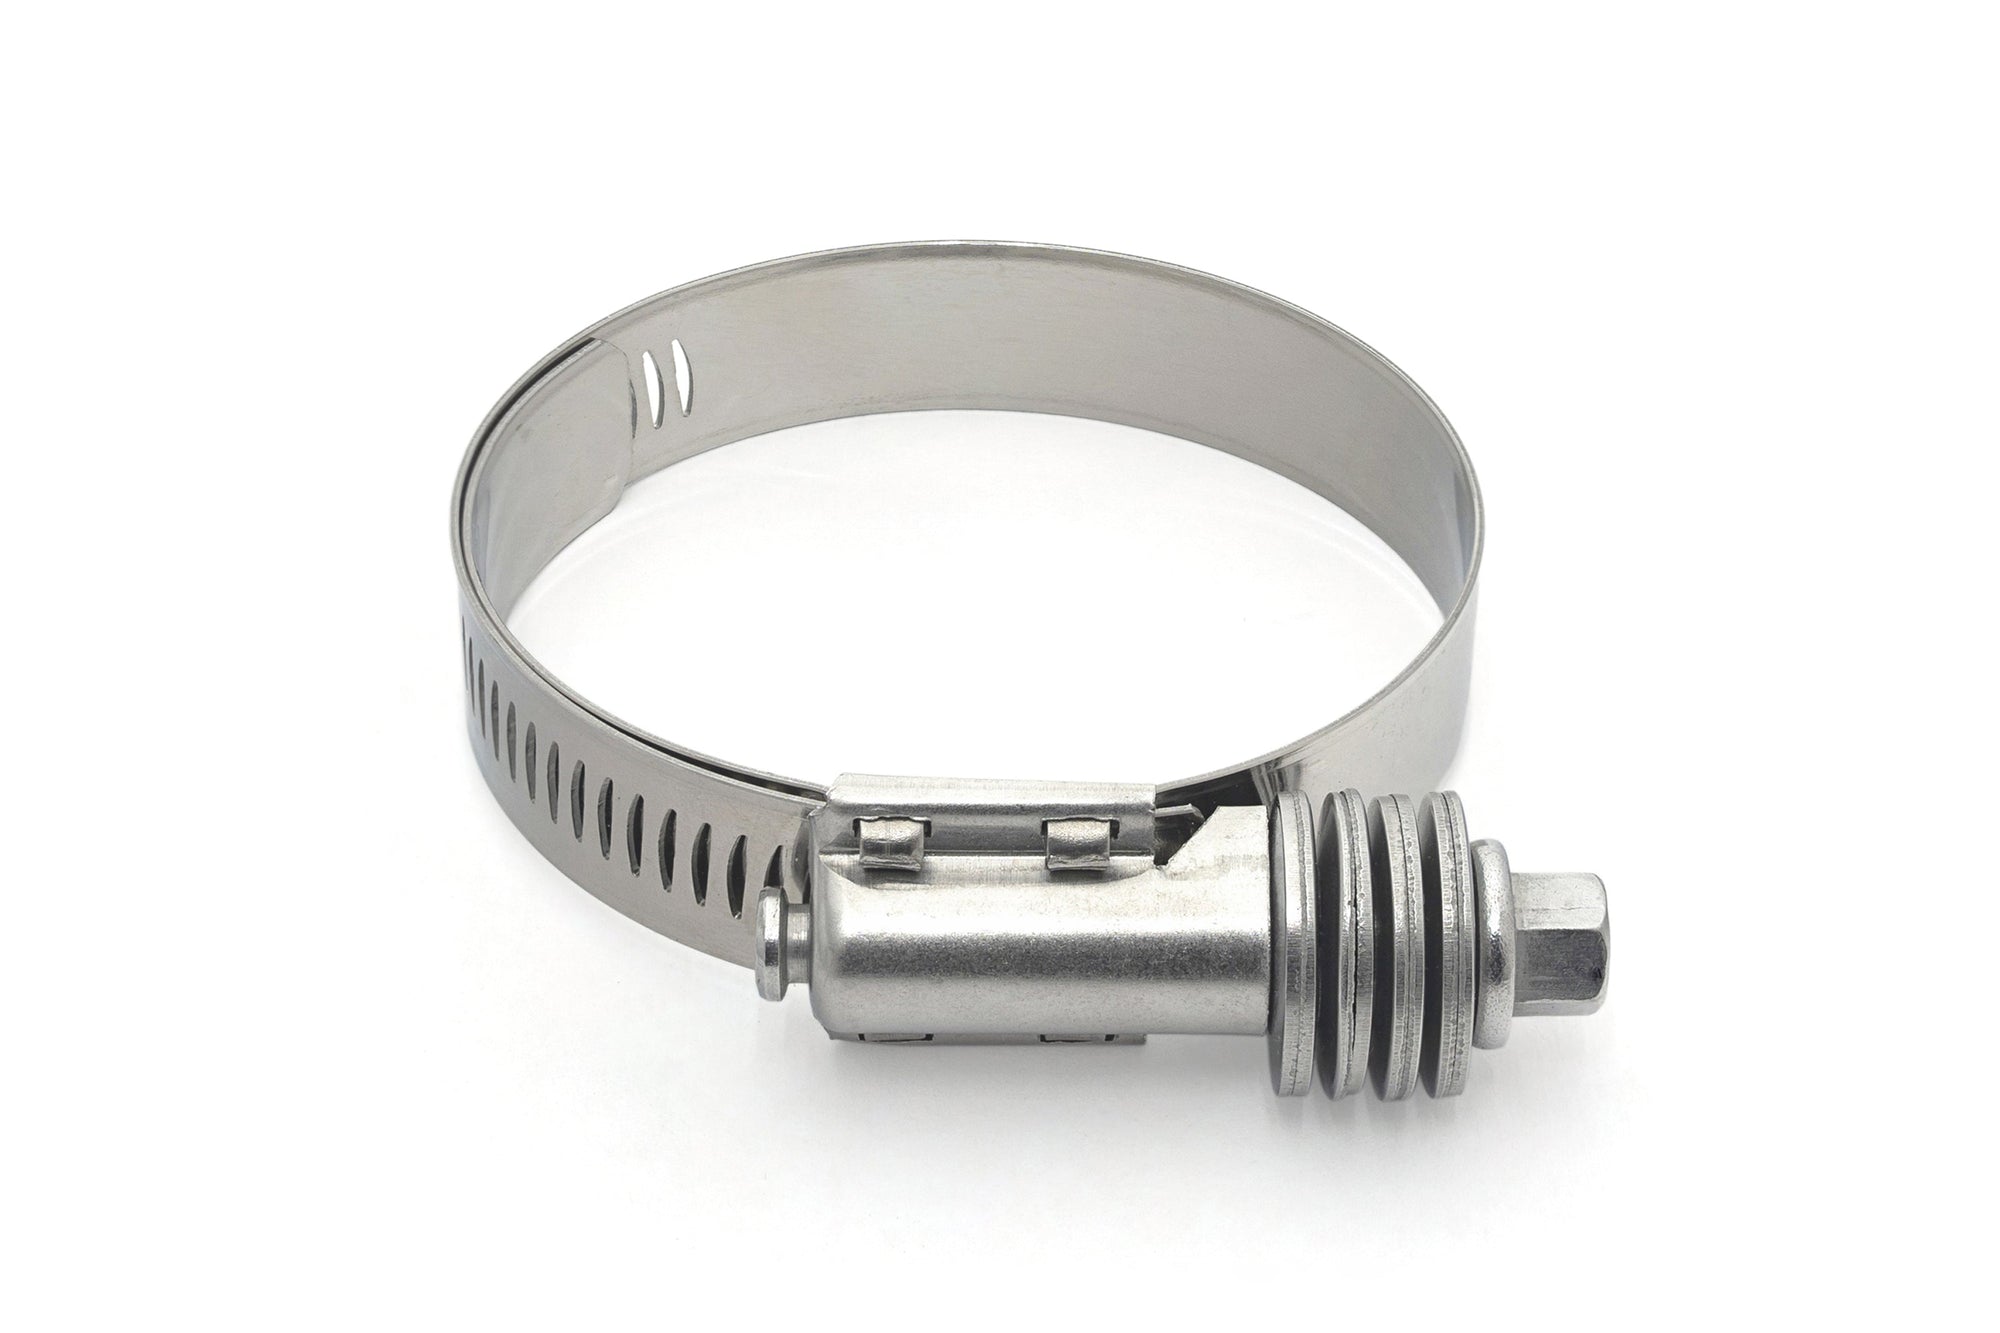 HPS Stainless Steel Heavy Duty Constant Tension Hose Clamp 3-1/4 - 4-1/8 inch 83mm - 105mm Size # 412